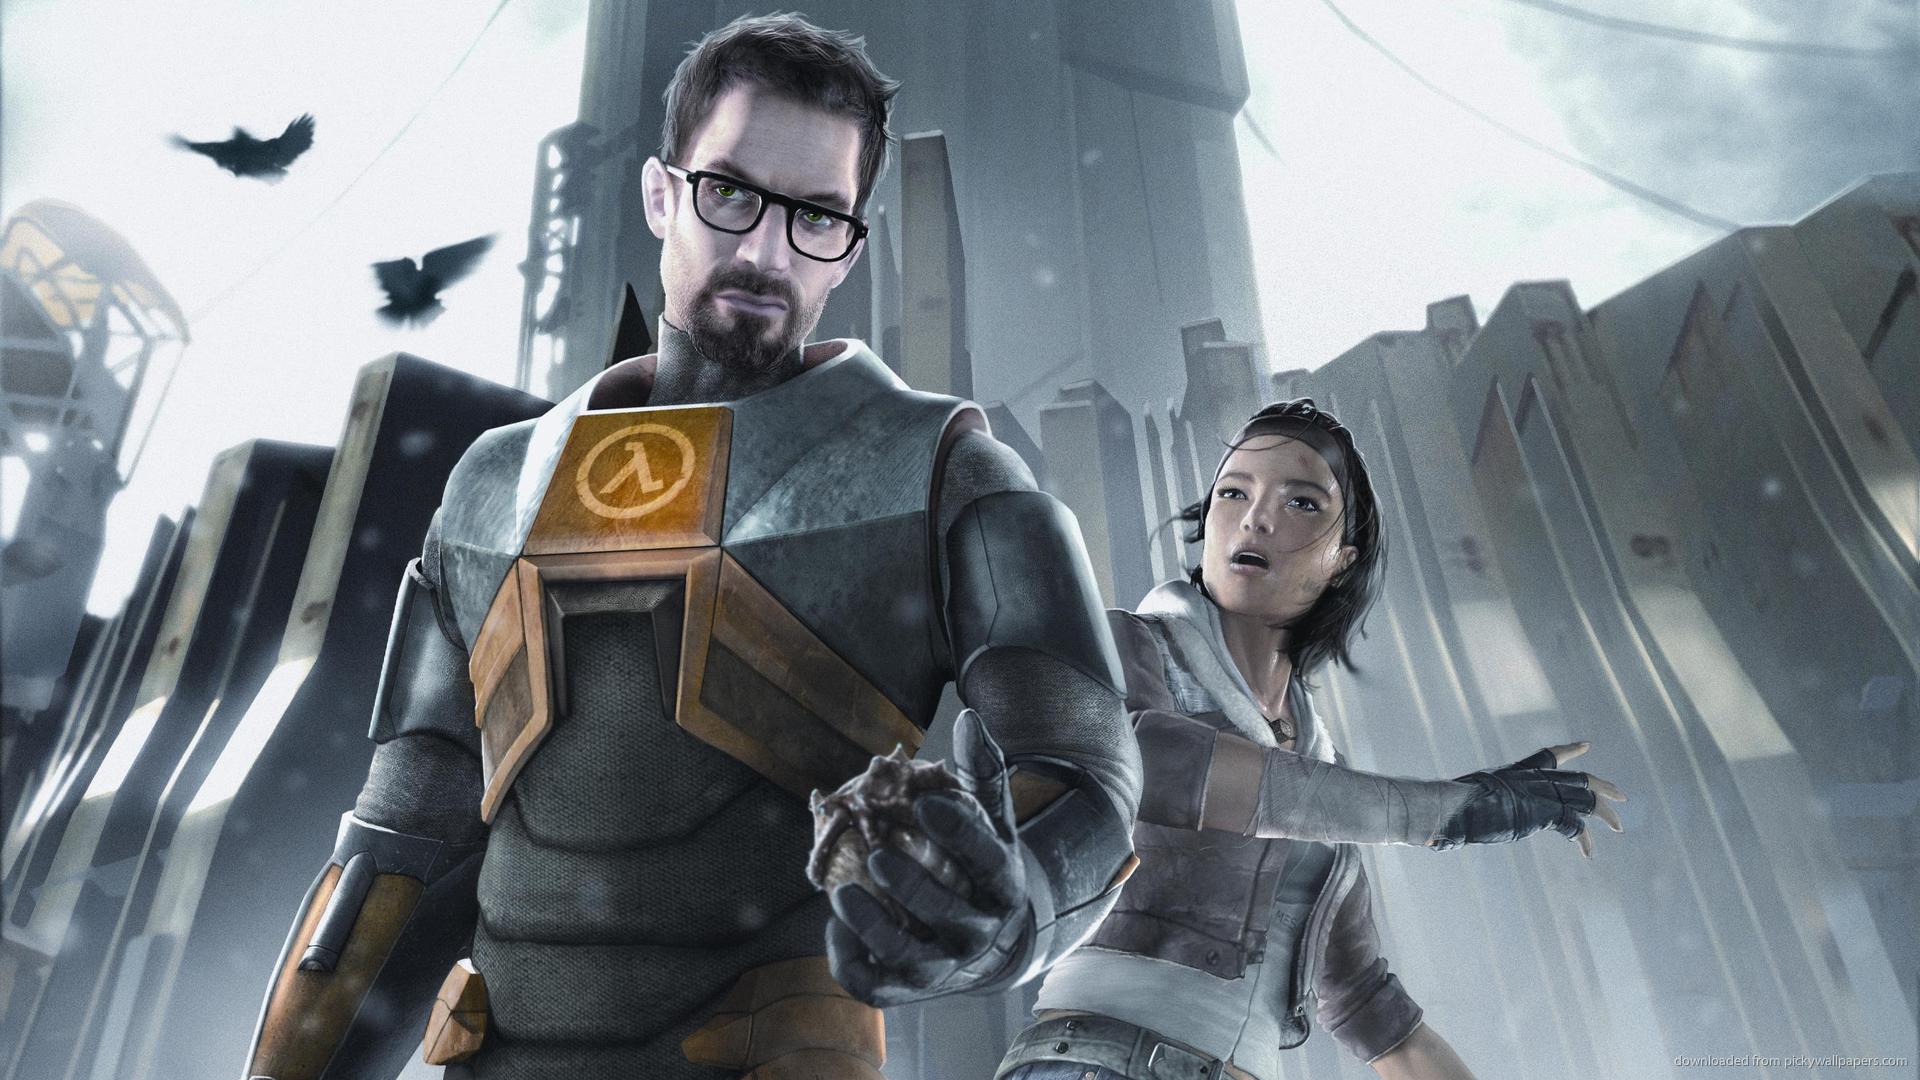 Image for Half-Life 3 won't be a VR game, says Valve